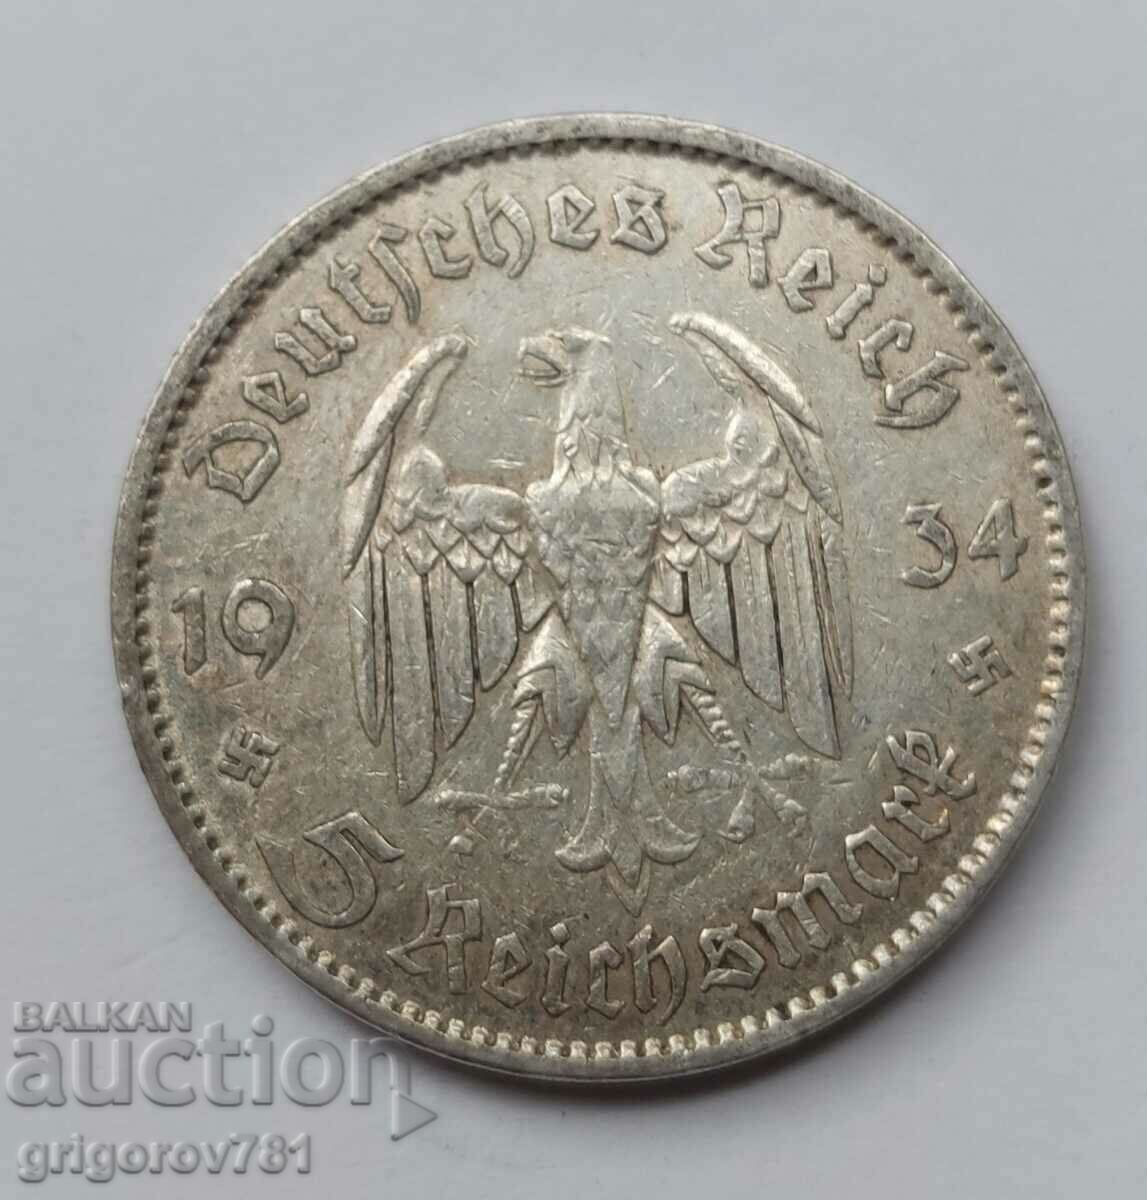 5 Mark Silver Germany 1934 A III Reich Silver Coin #8